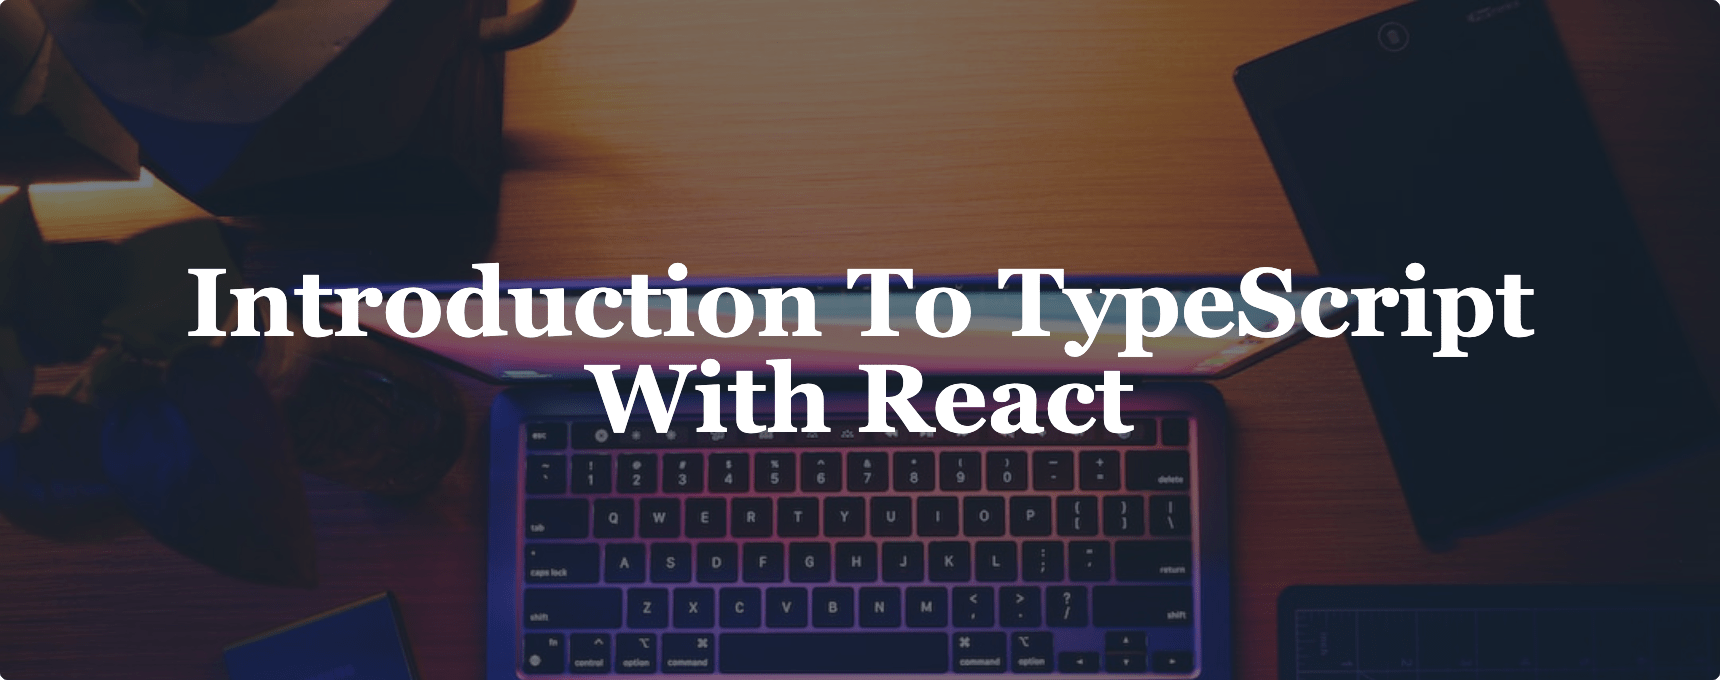 Image for How to Use TypeScript with React